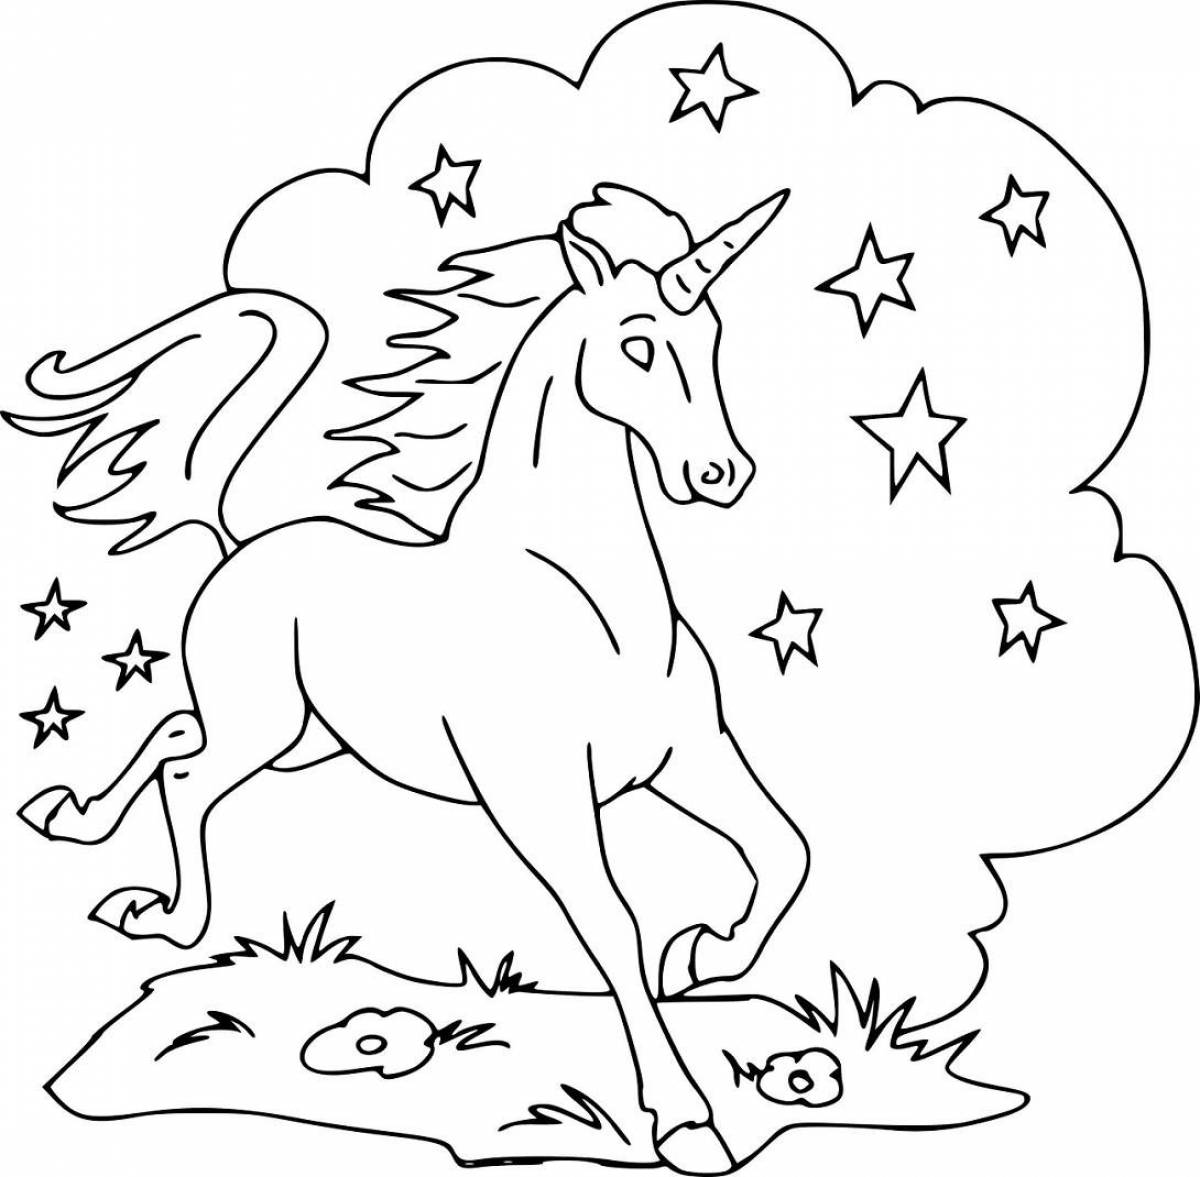 Magic unicorn coloring book for kids 3-4 years old